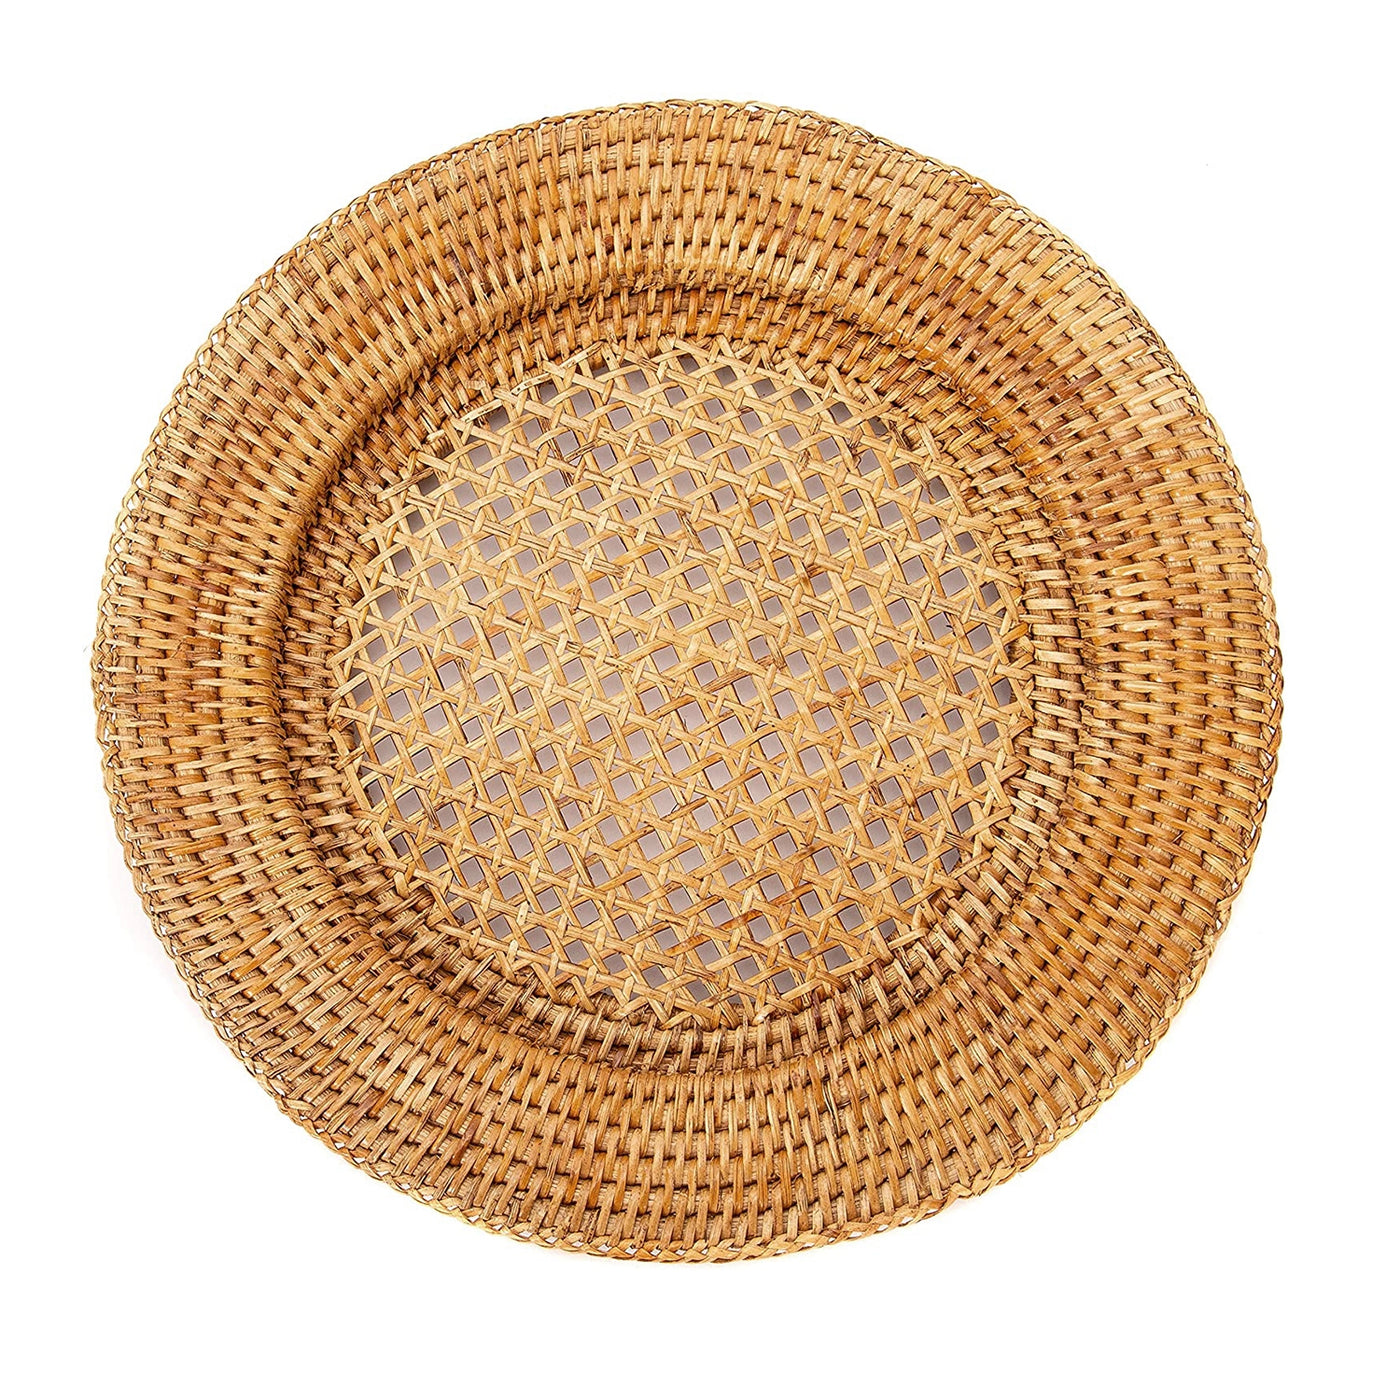 Brown Rattan Charger Plate - Woven Wicker Straw Placemat